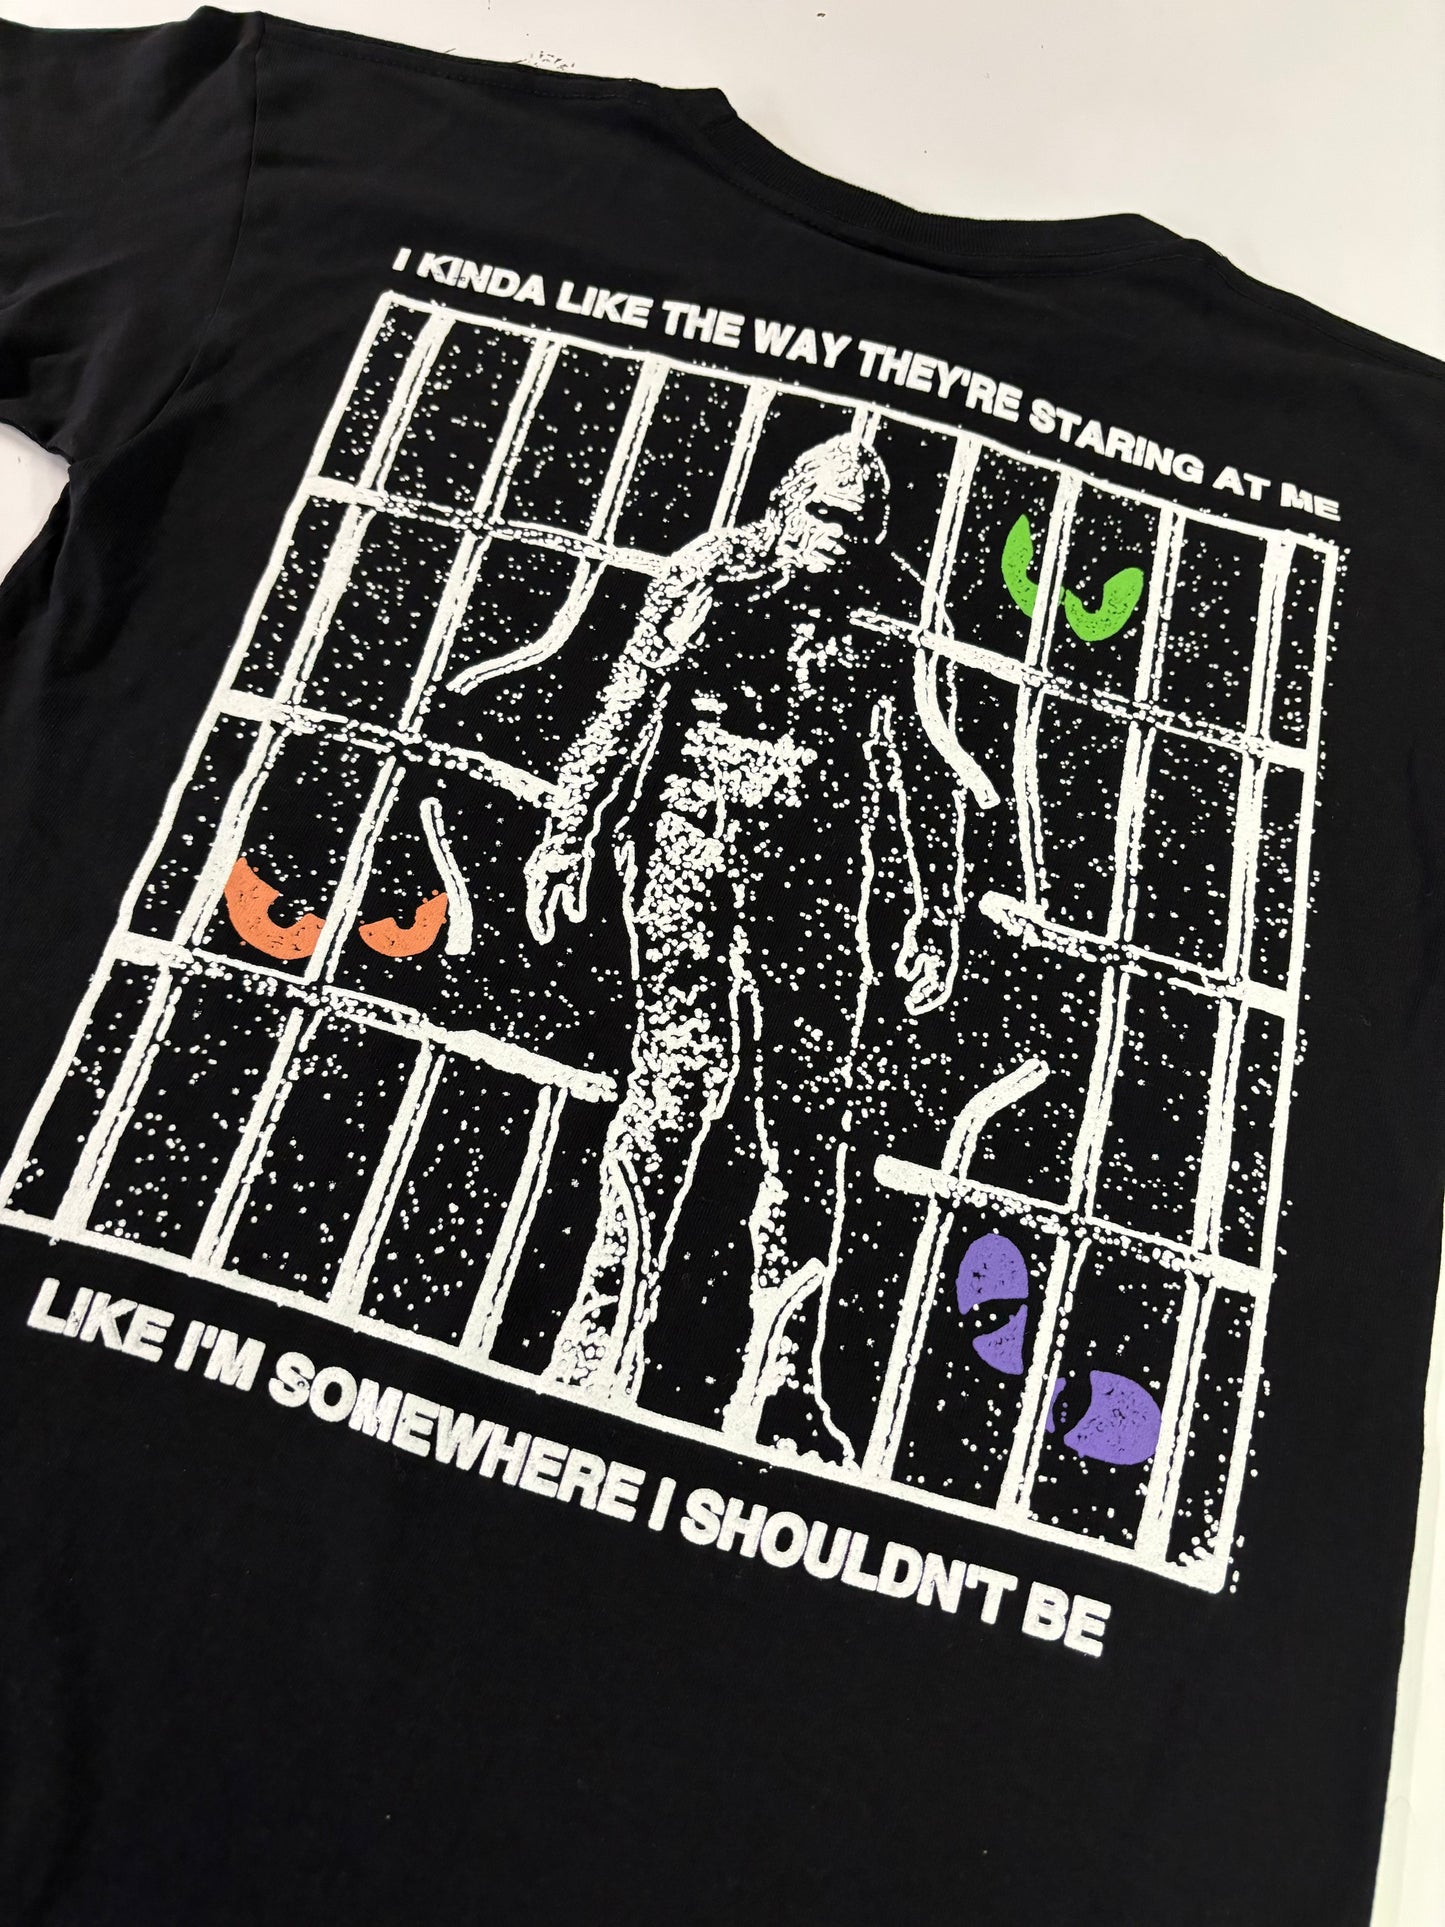 Cage t-shirt